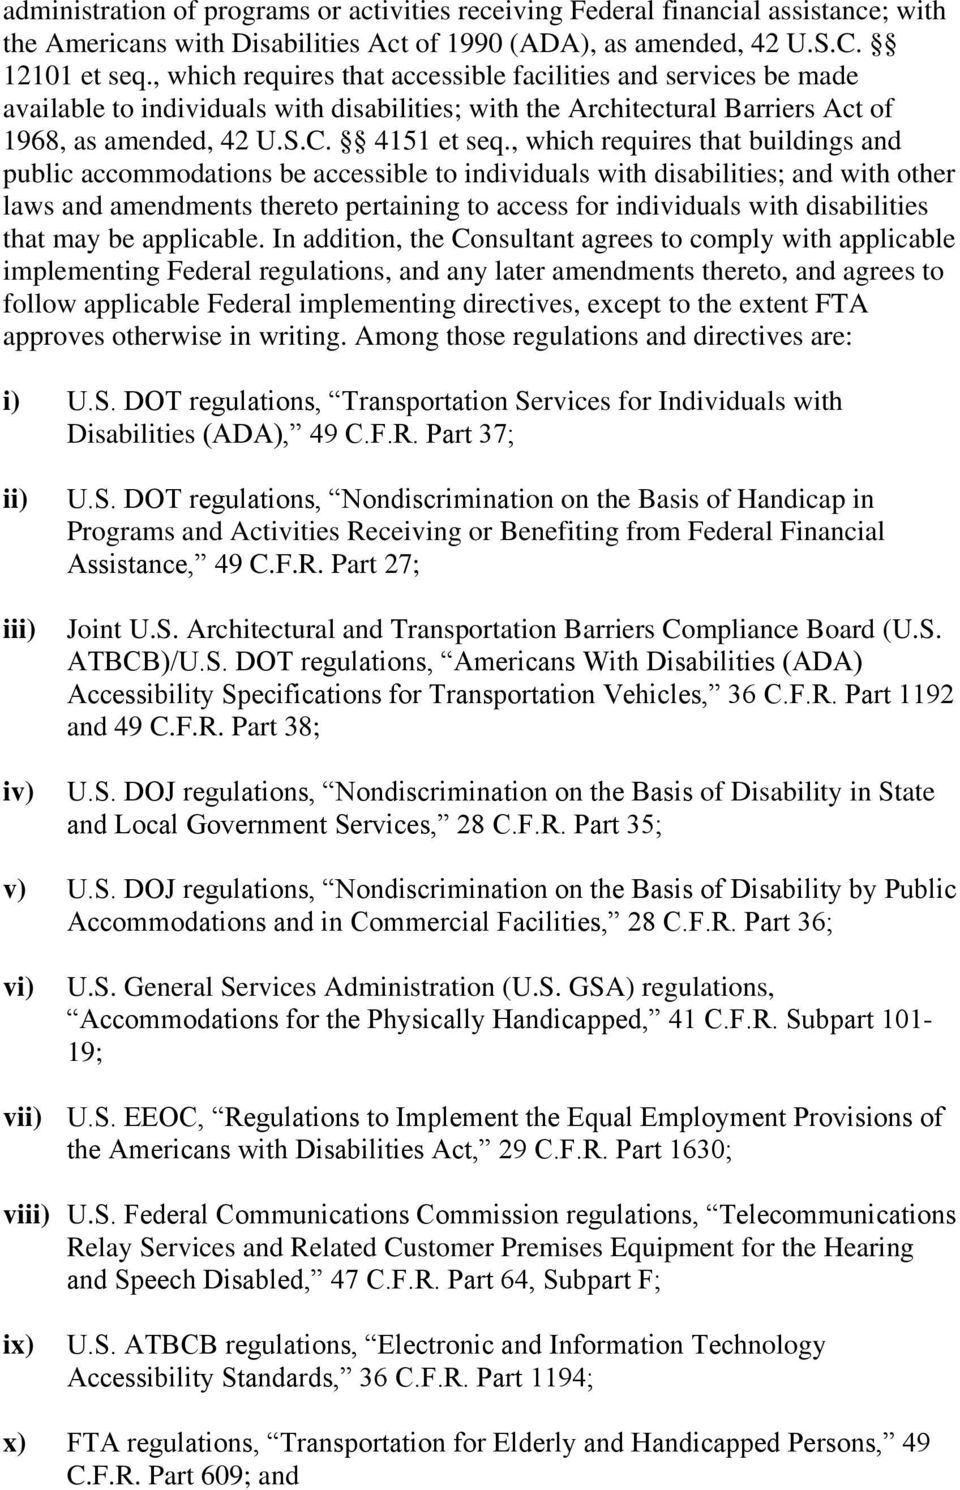 , which requires that buildings and public accommodations be accessible to individuals with disabilities; and with other laws and amendments thereto pertaining to access for individuals with